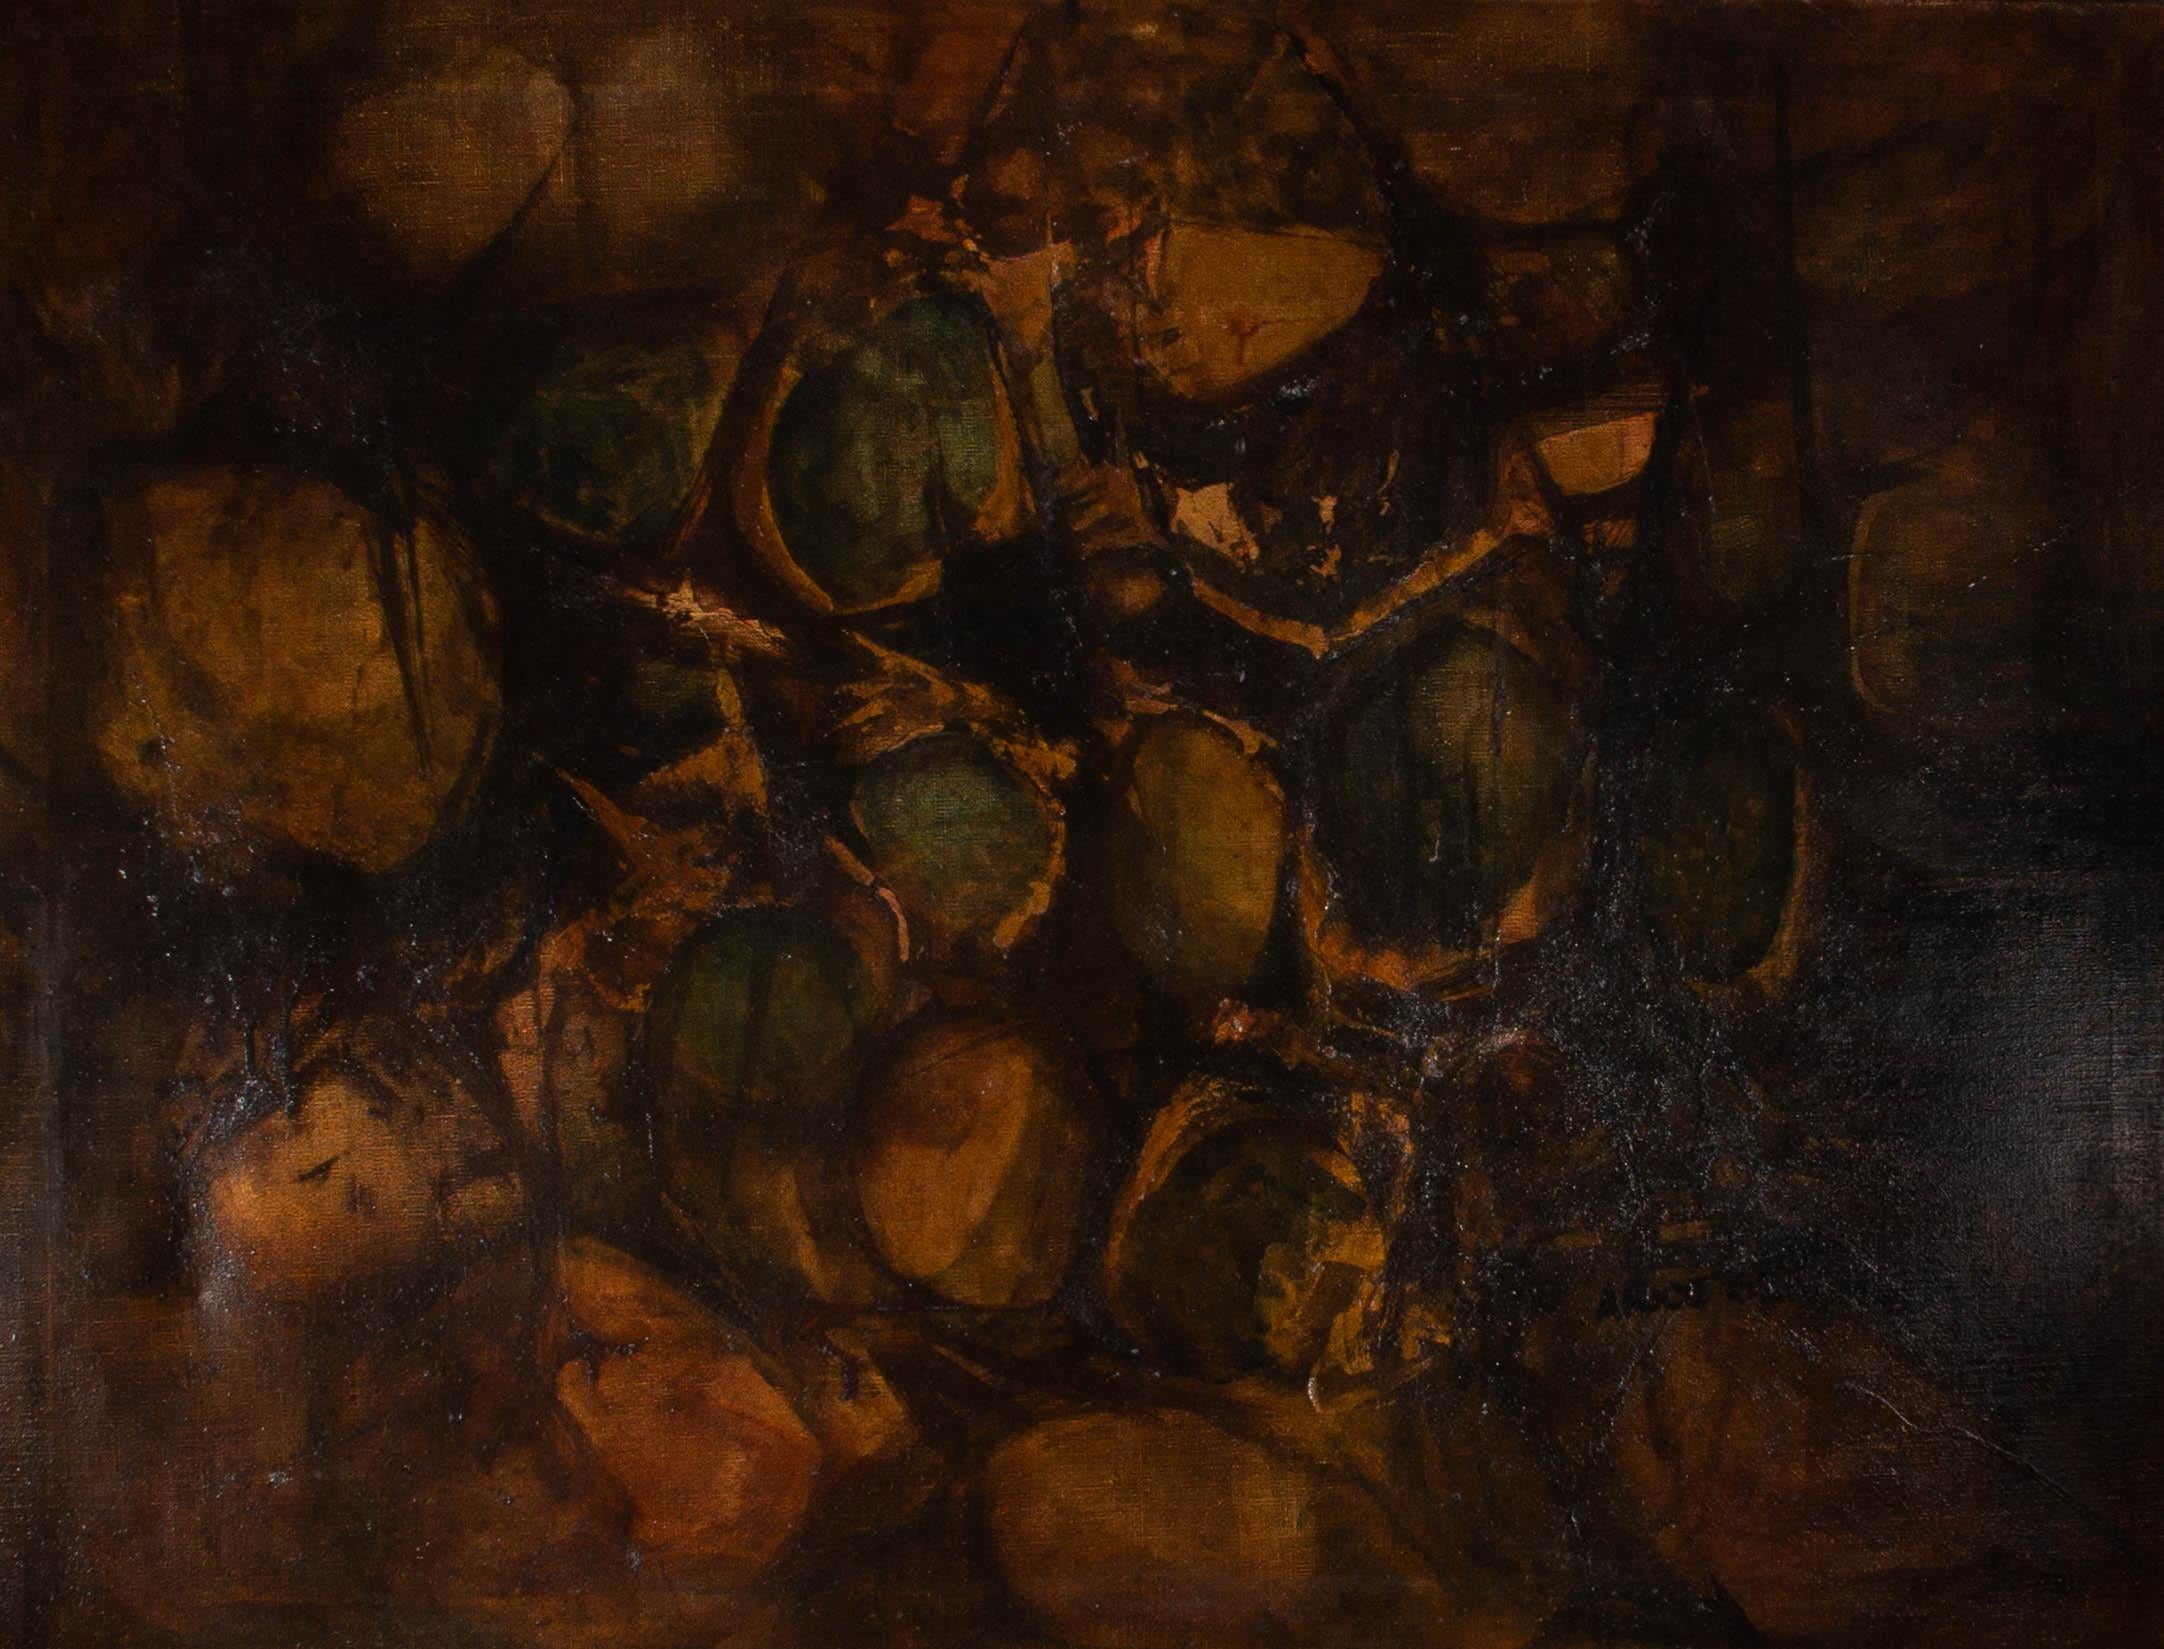 A mysterious abstract in darkened tones of brown. Faint cell like shapes interlock to form an unusual texture. The artist has signed and dated in the lower right quadrant. On canvas.